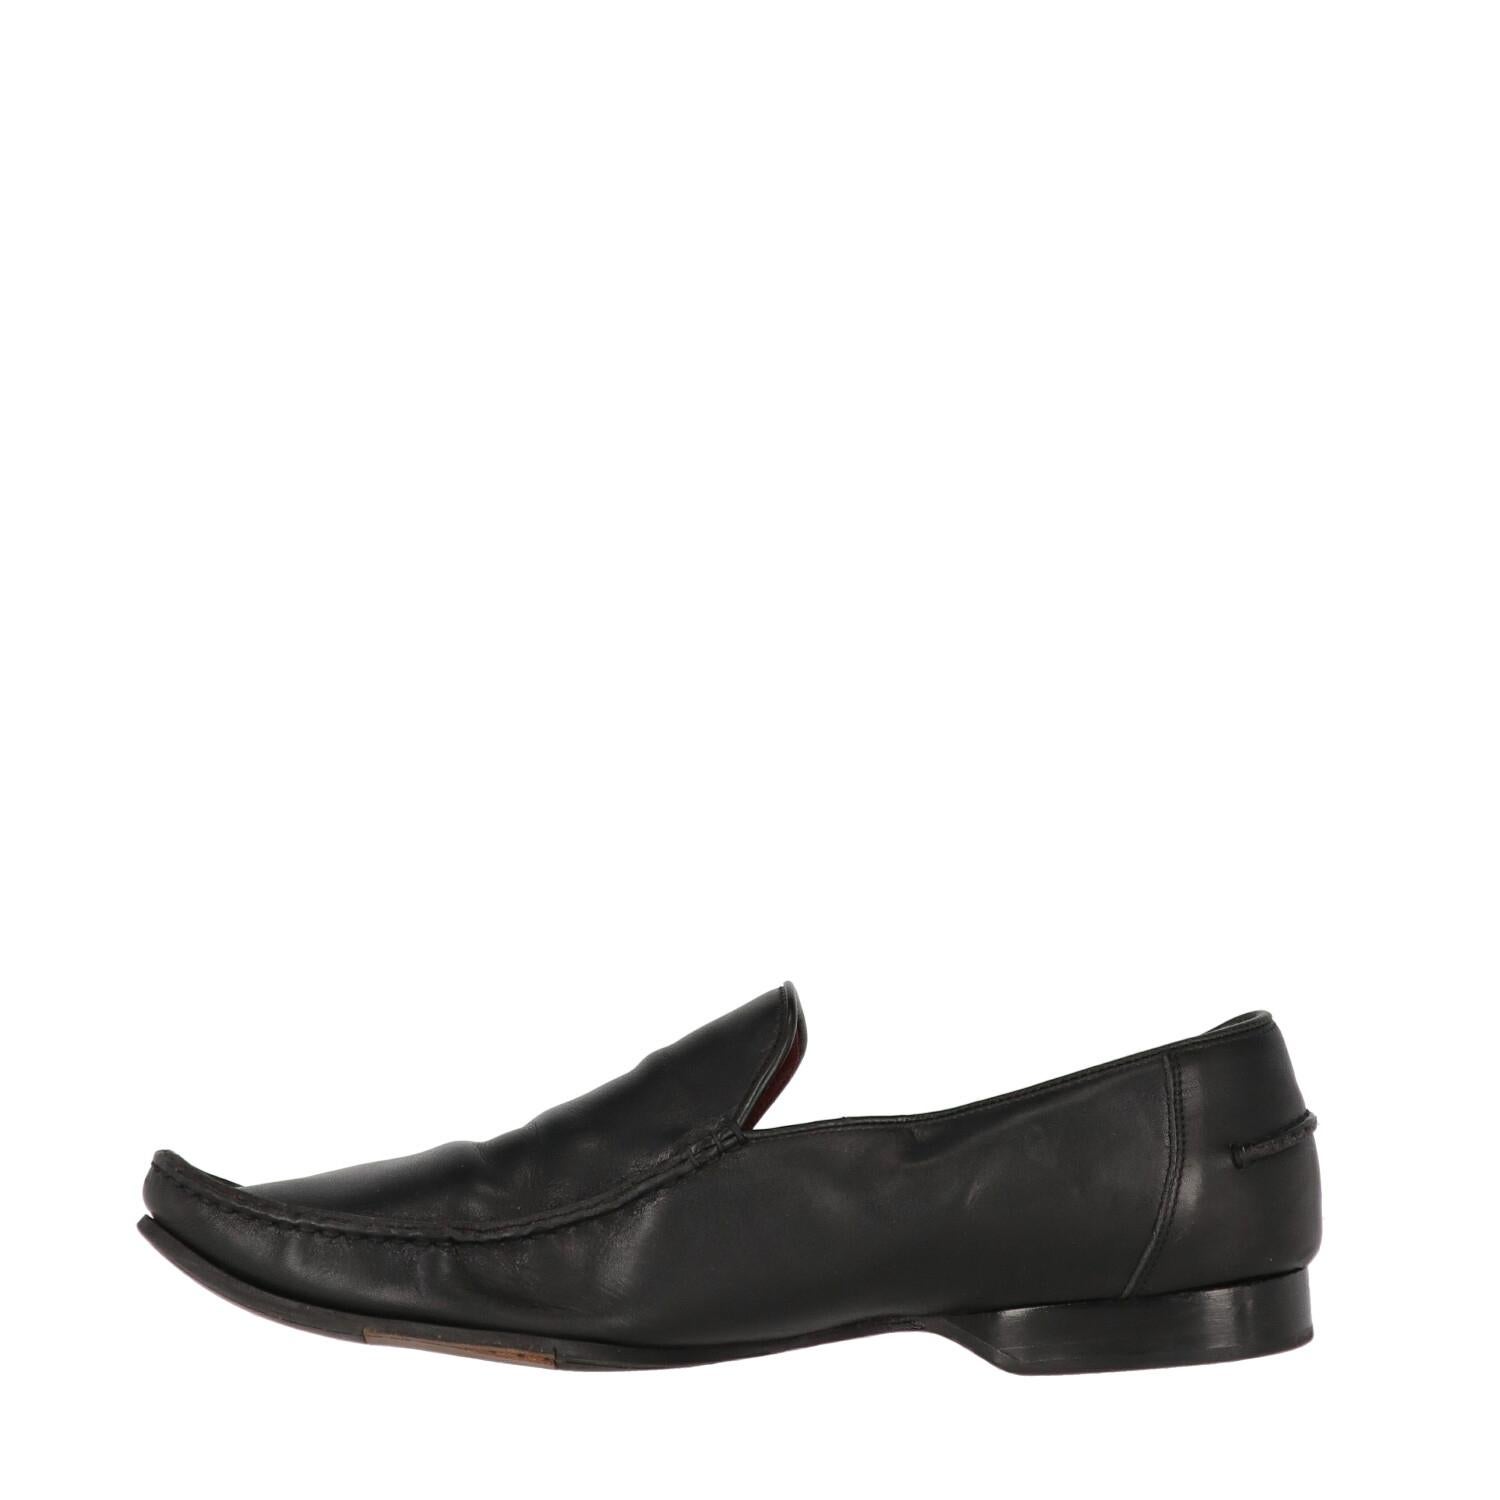 Gianfranco Ferré black genuine leather loafers, with slighlty pointed toe. The shoes show some creases and signs of wear on the leather and sole, as shown in the pictures. 
Years: 90s

Made in Italy

Size: 44 EU

Length insole: 30 cm
Heel: 1,5 cm